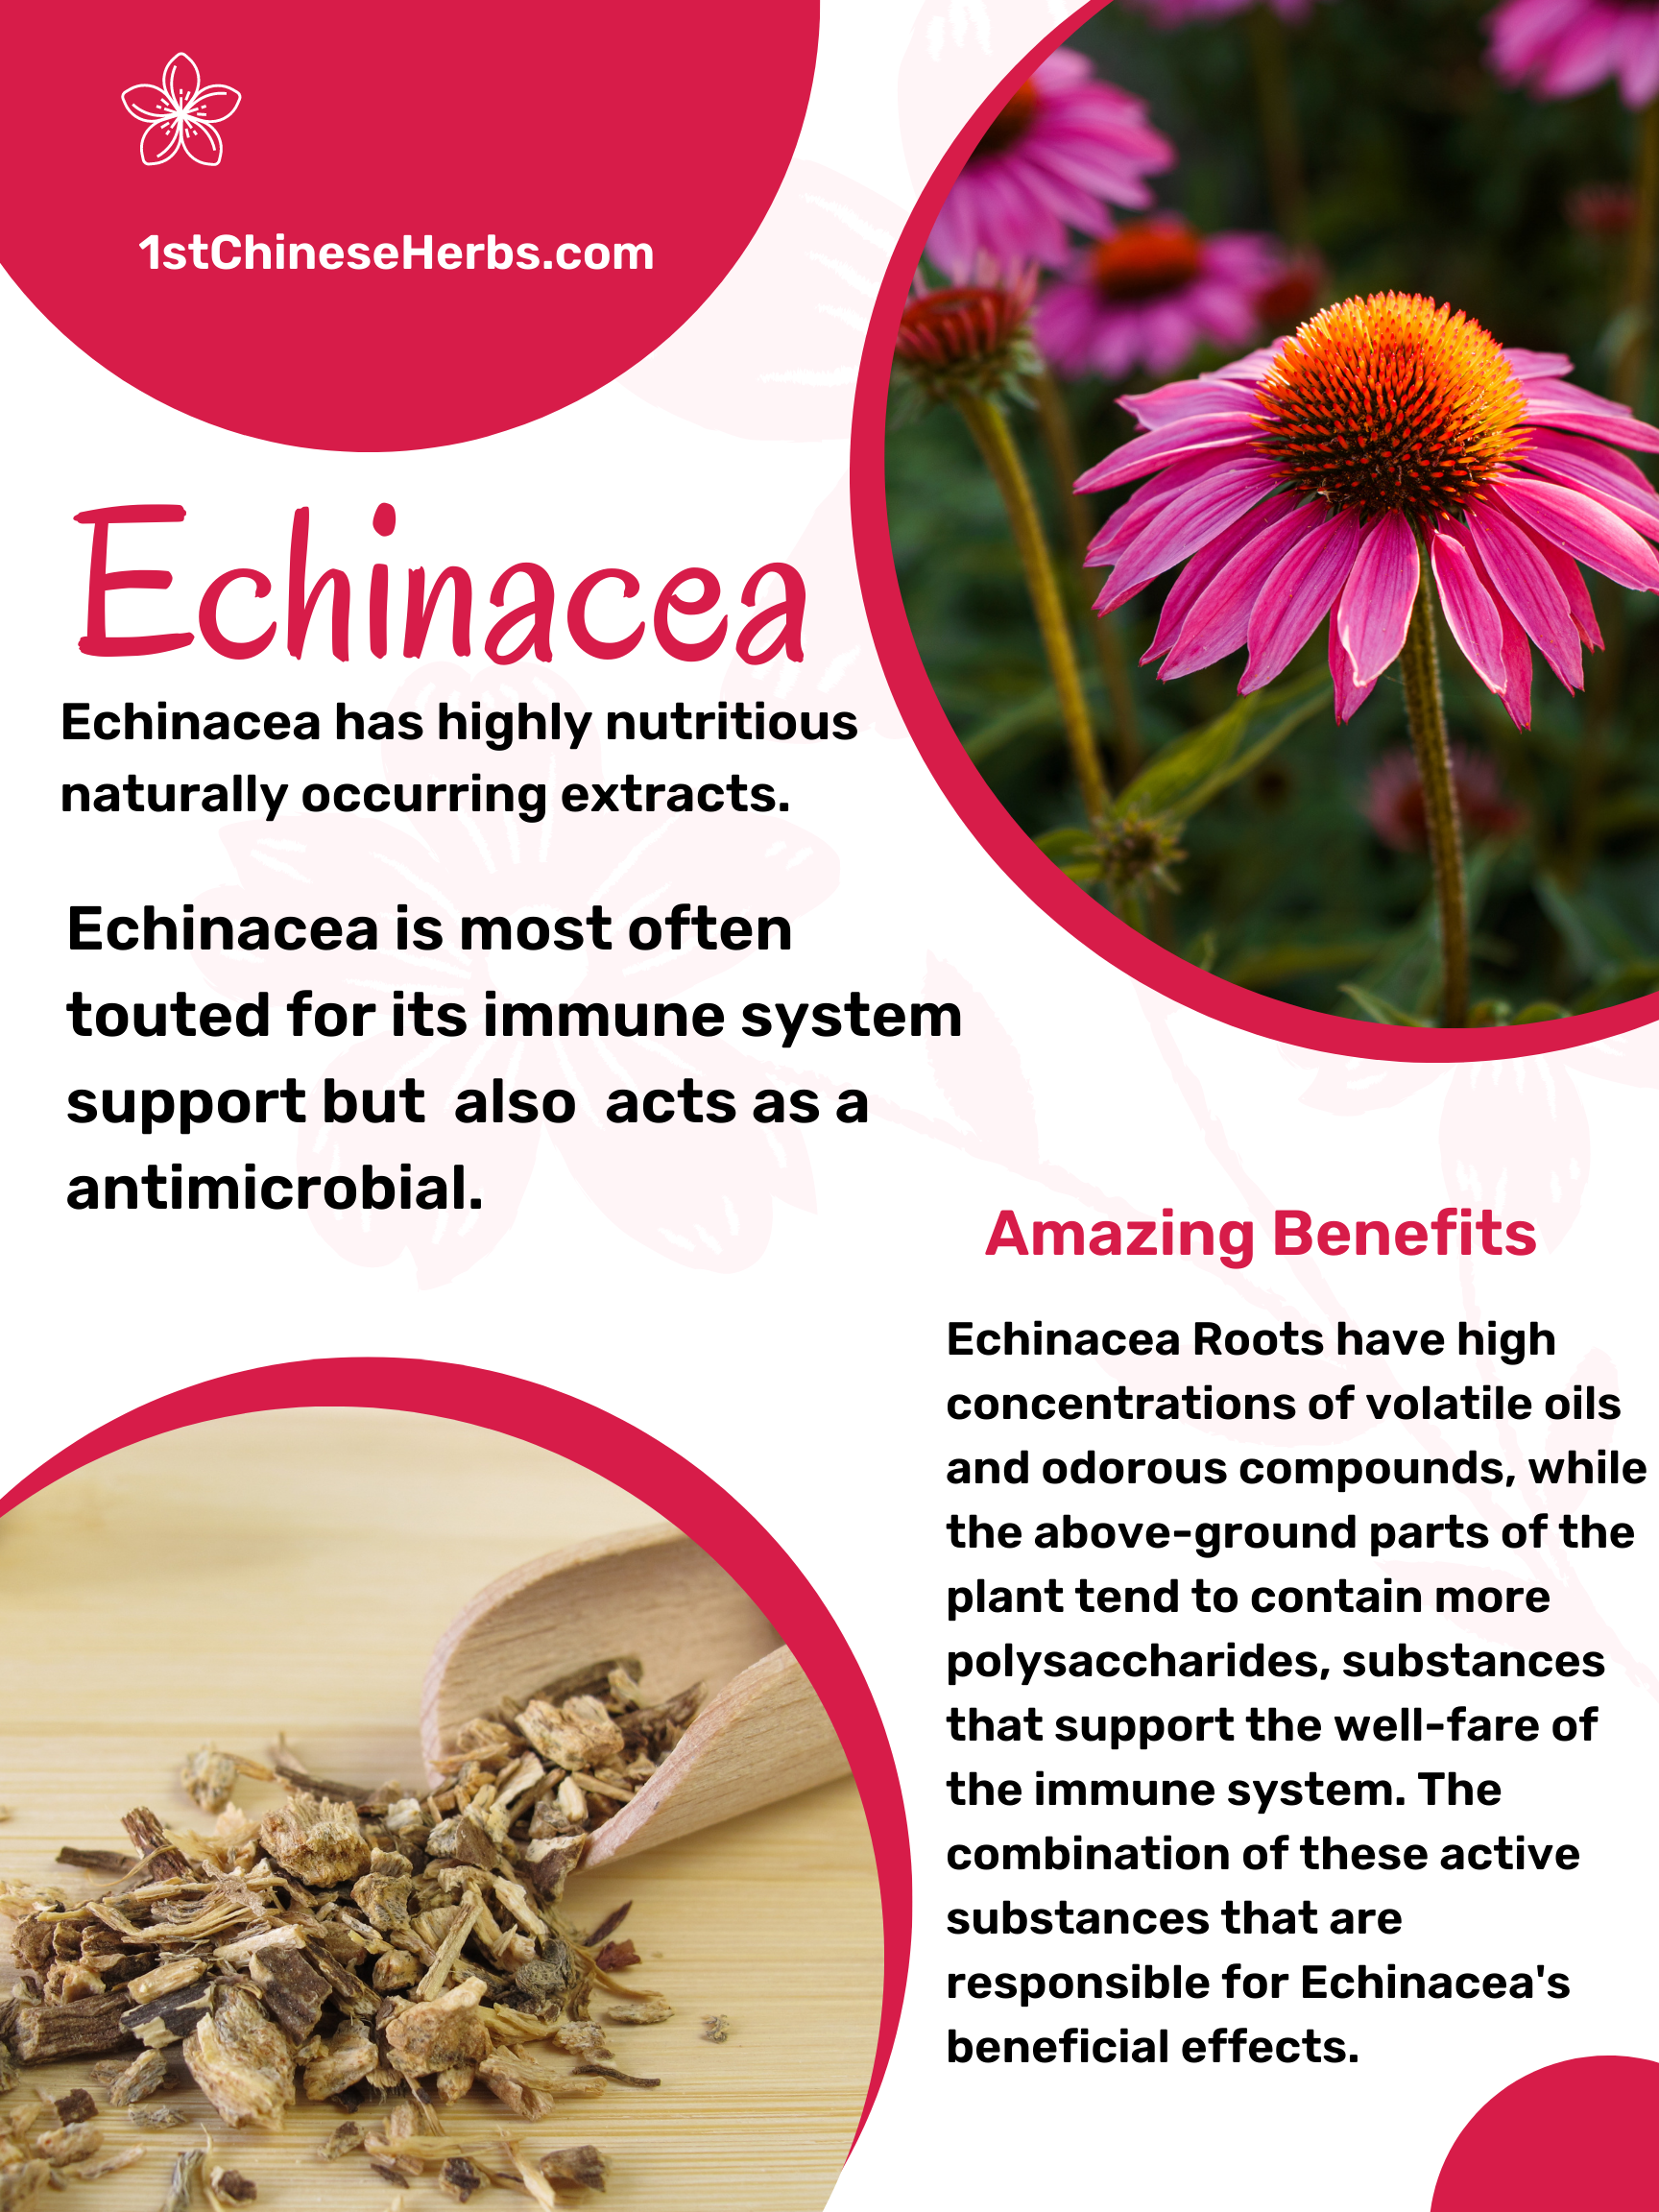 Impressive immune supporting benefits. How to use in teas. How to make poultices. Add Echinacea in with other adaptive herbs. 